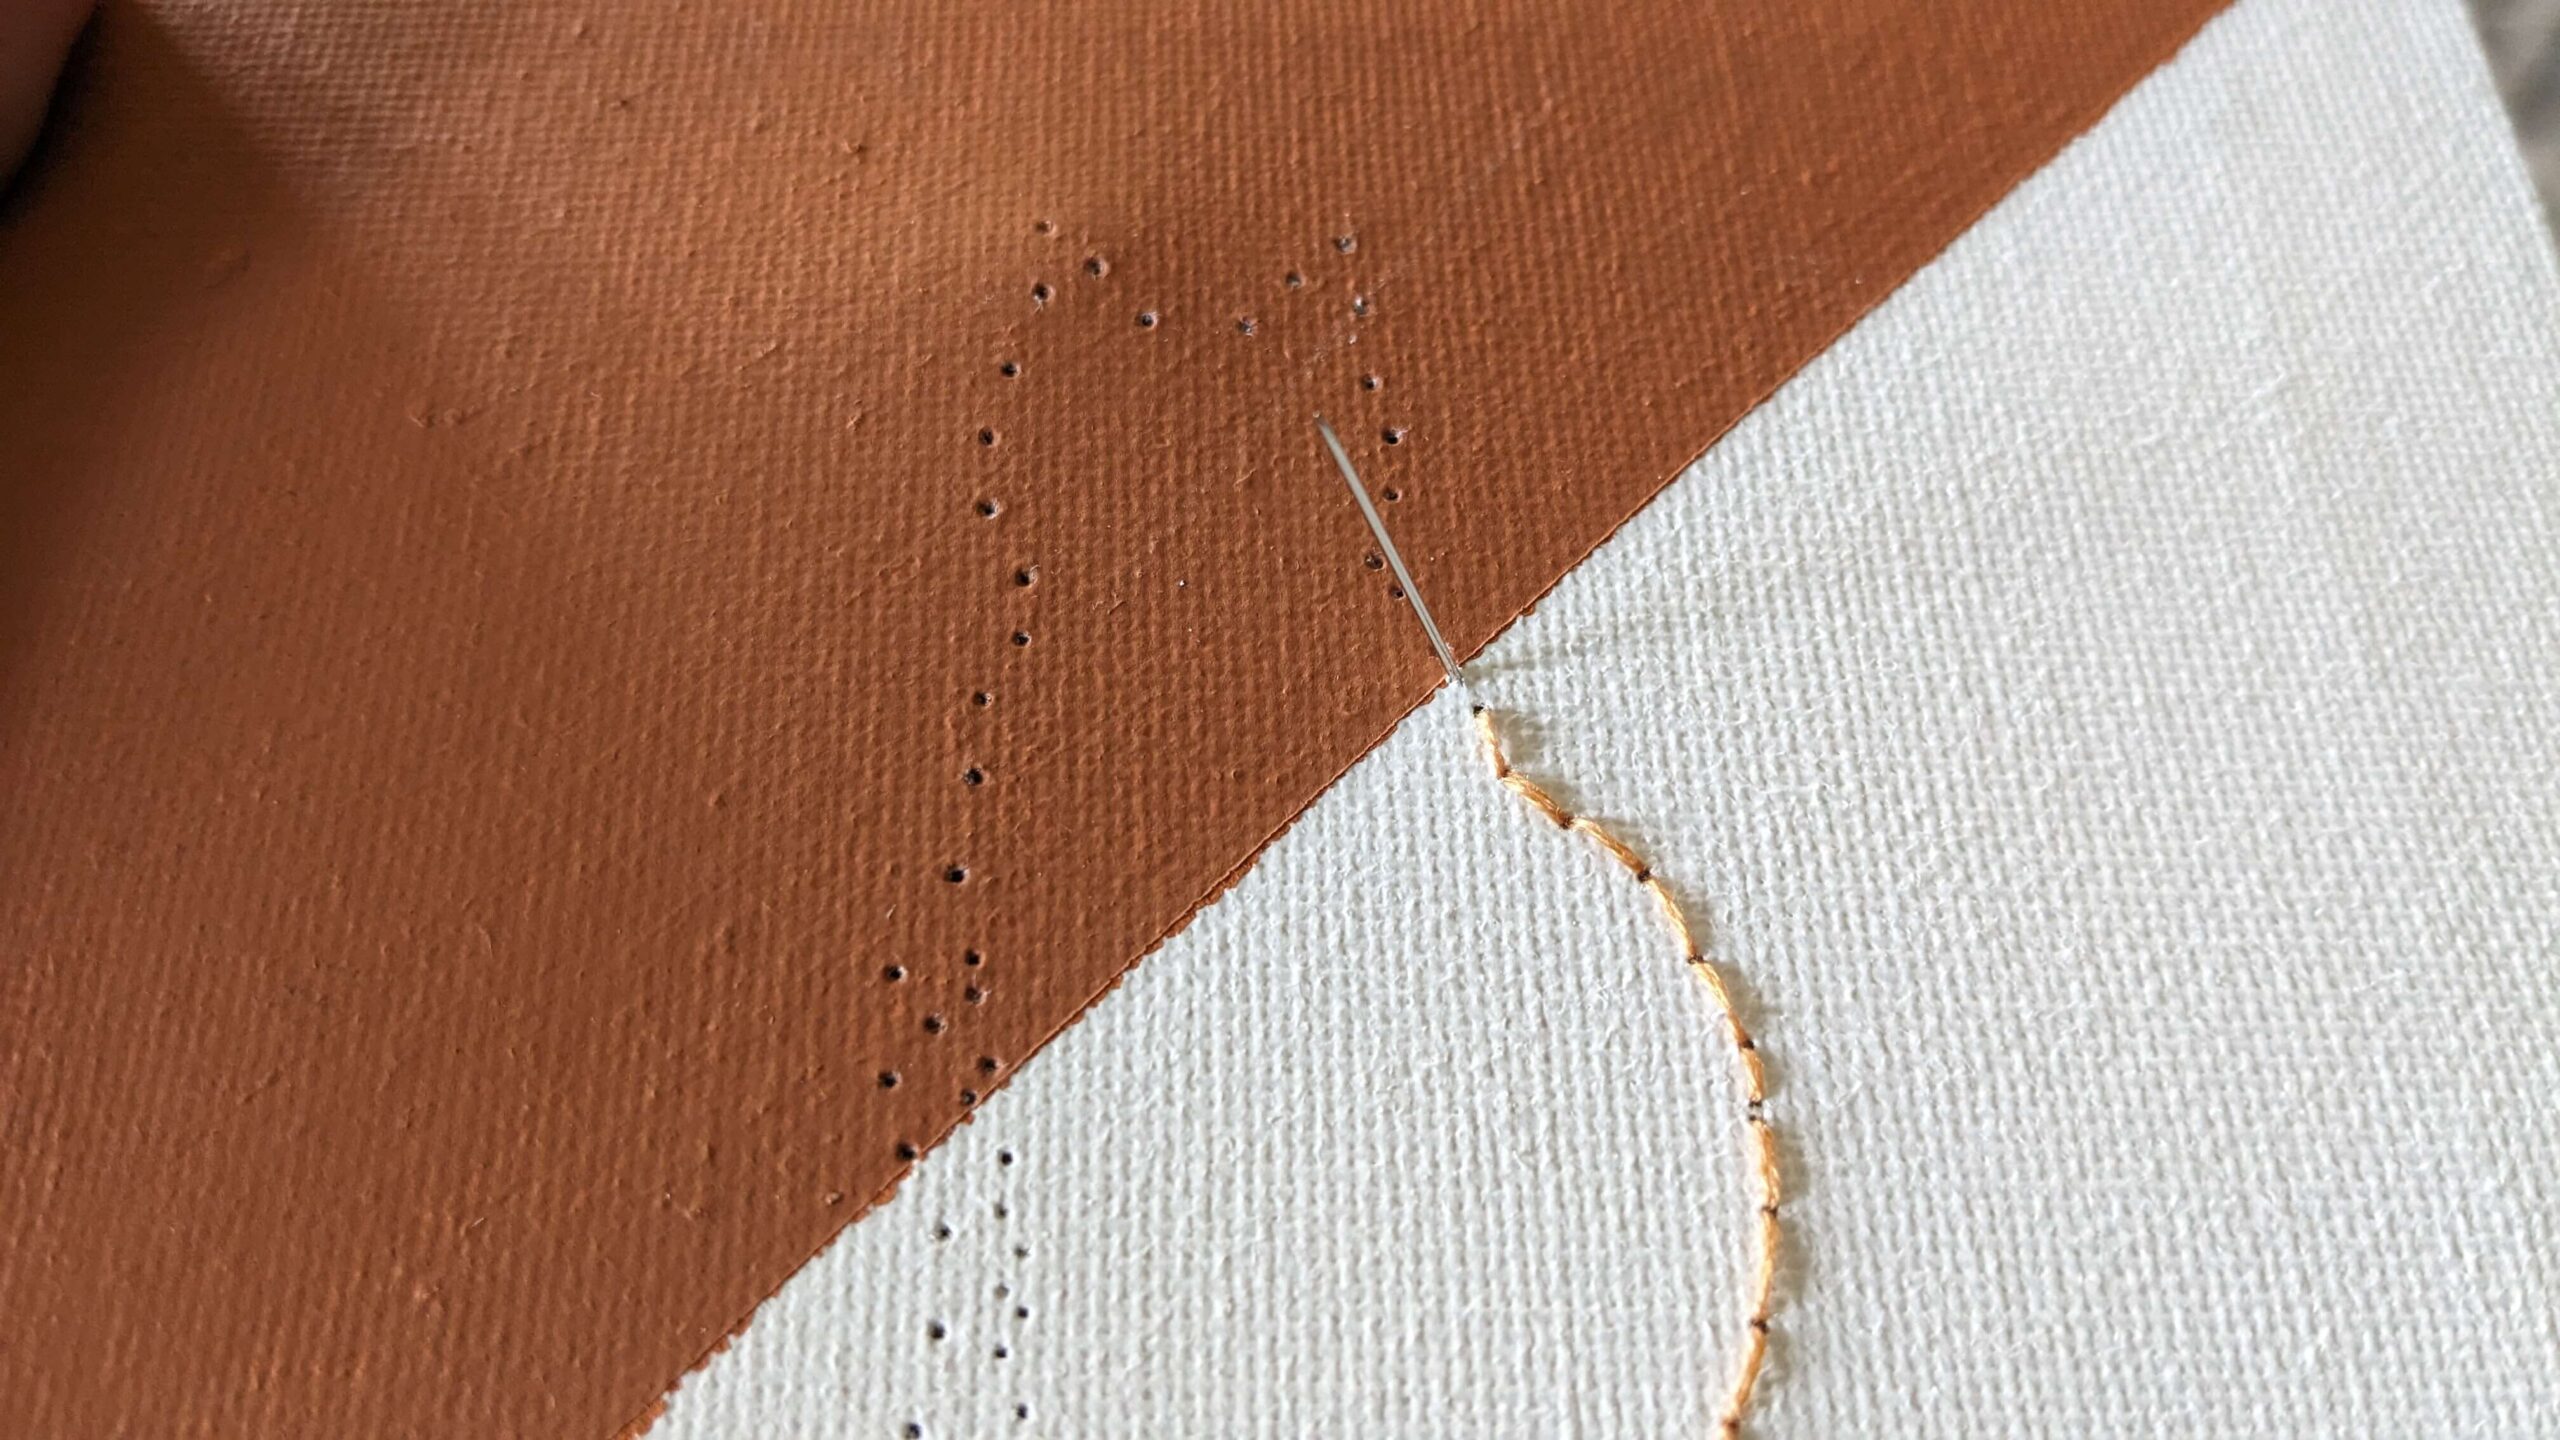 orange and white canvas with a needle poking through and orange embroidery floss in the shape of the lower half of a cat